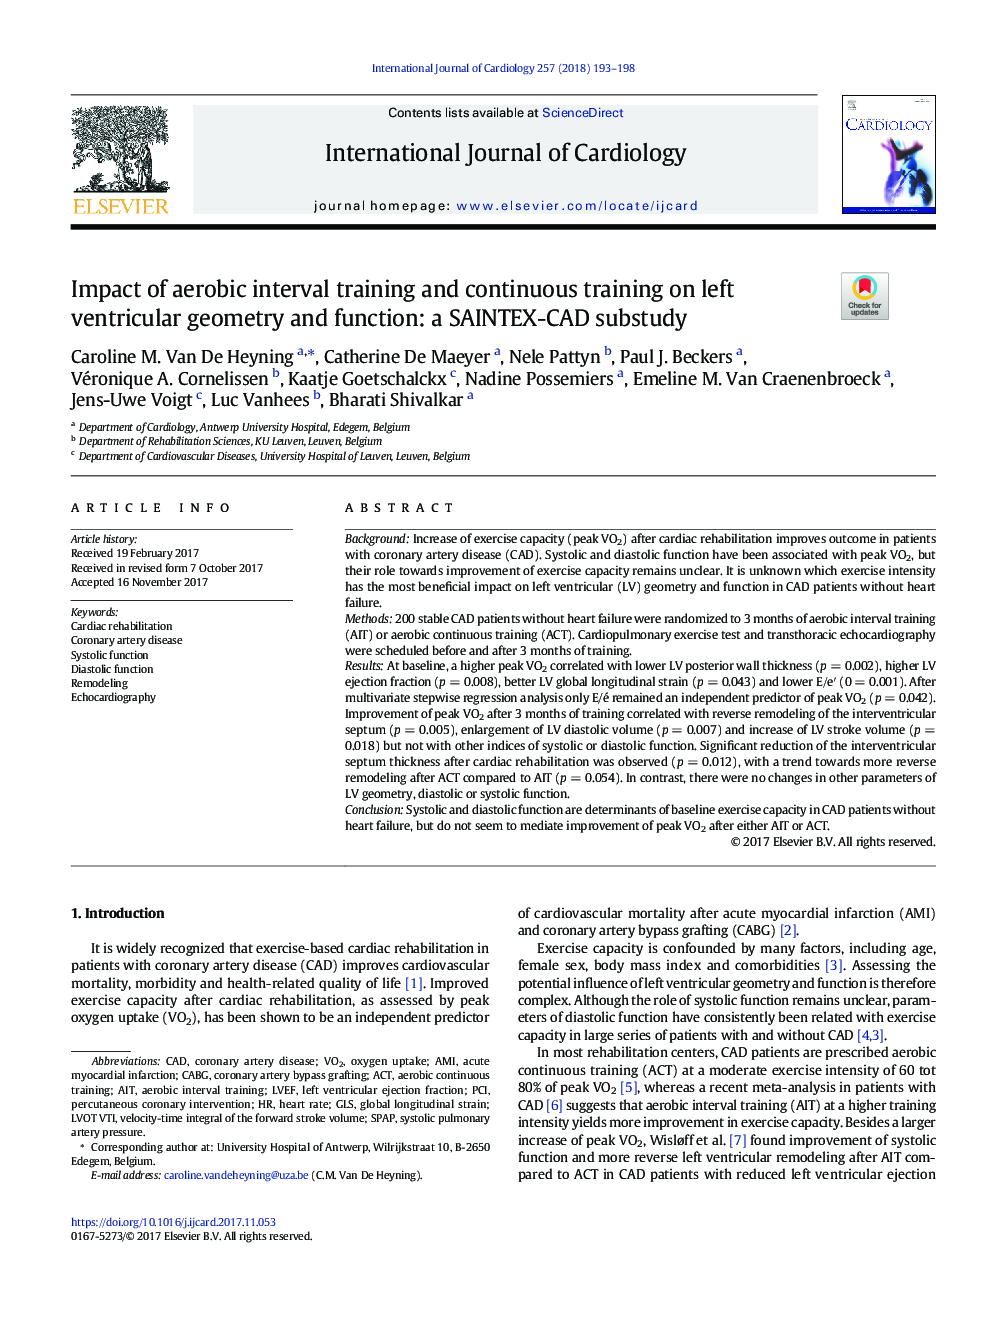 Impact of aerobic interval training and continuous training on left ventricular geometry and function: a SAINTEX-CAD substudy